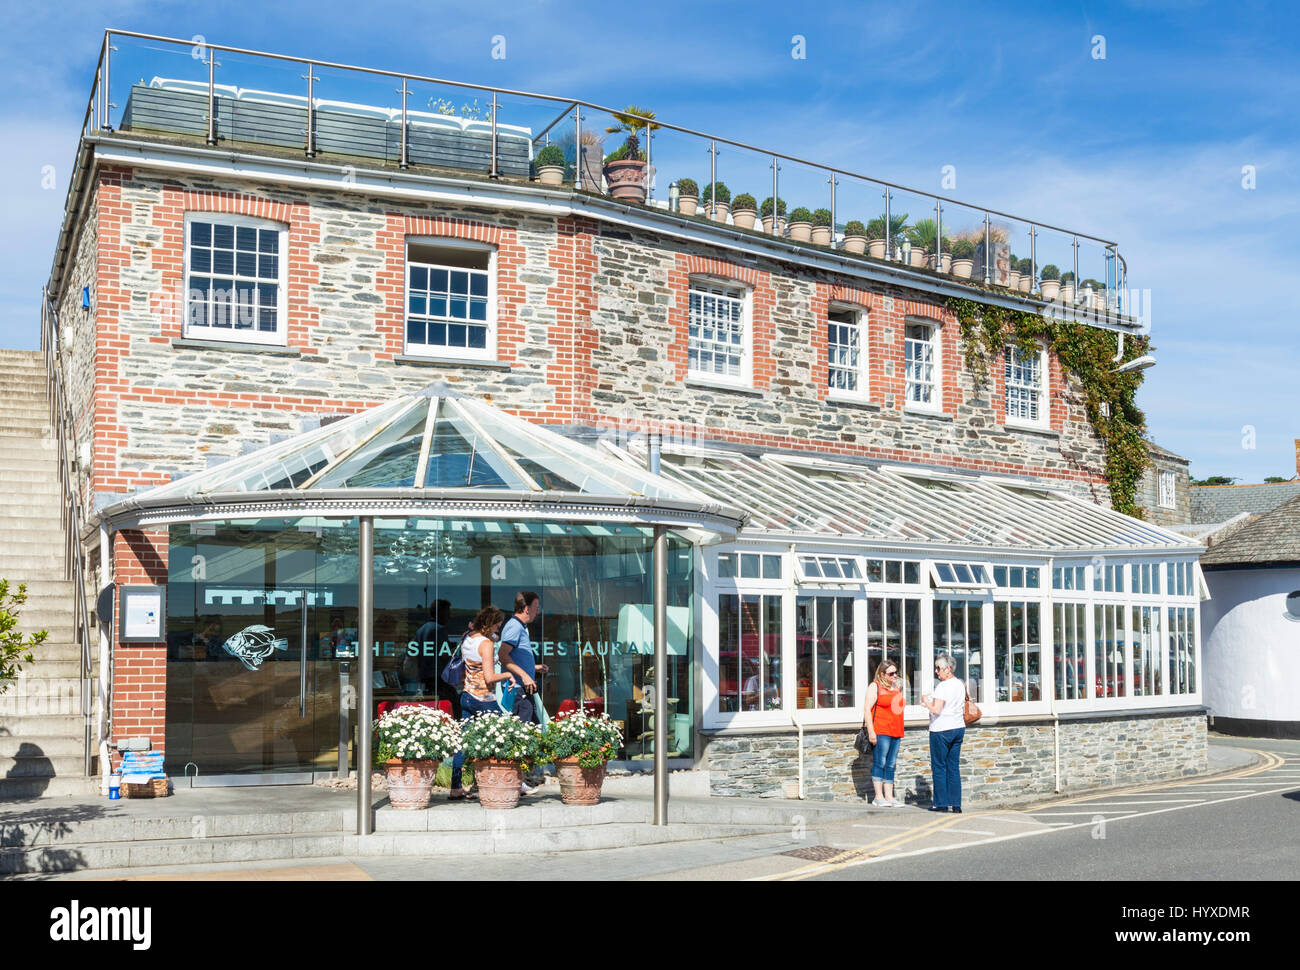 Padstow Cornwall the seafood restaurant Padstow cornwall rick stein owner Padstow Harbour Cornwall west country england uk gb eu europe Stock Photo